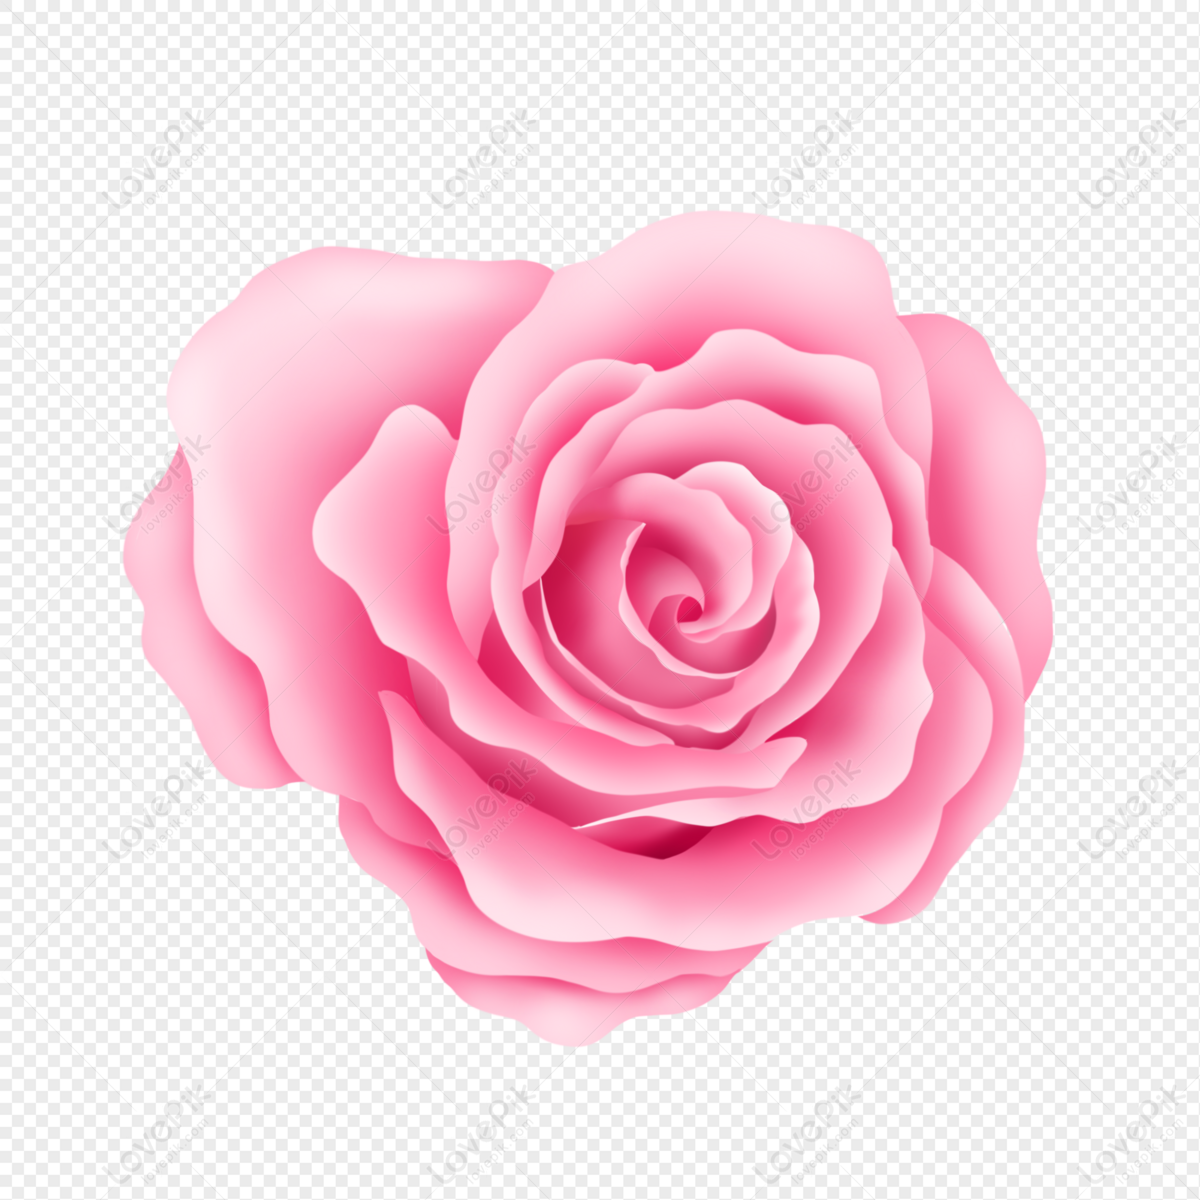 Pink Rose Flower PNG Transparent And Clipart Image For Free Download -  Lovepik | 401522586